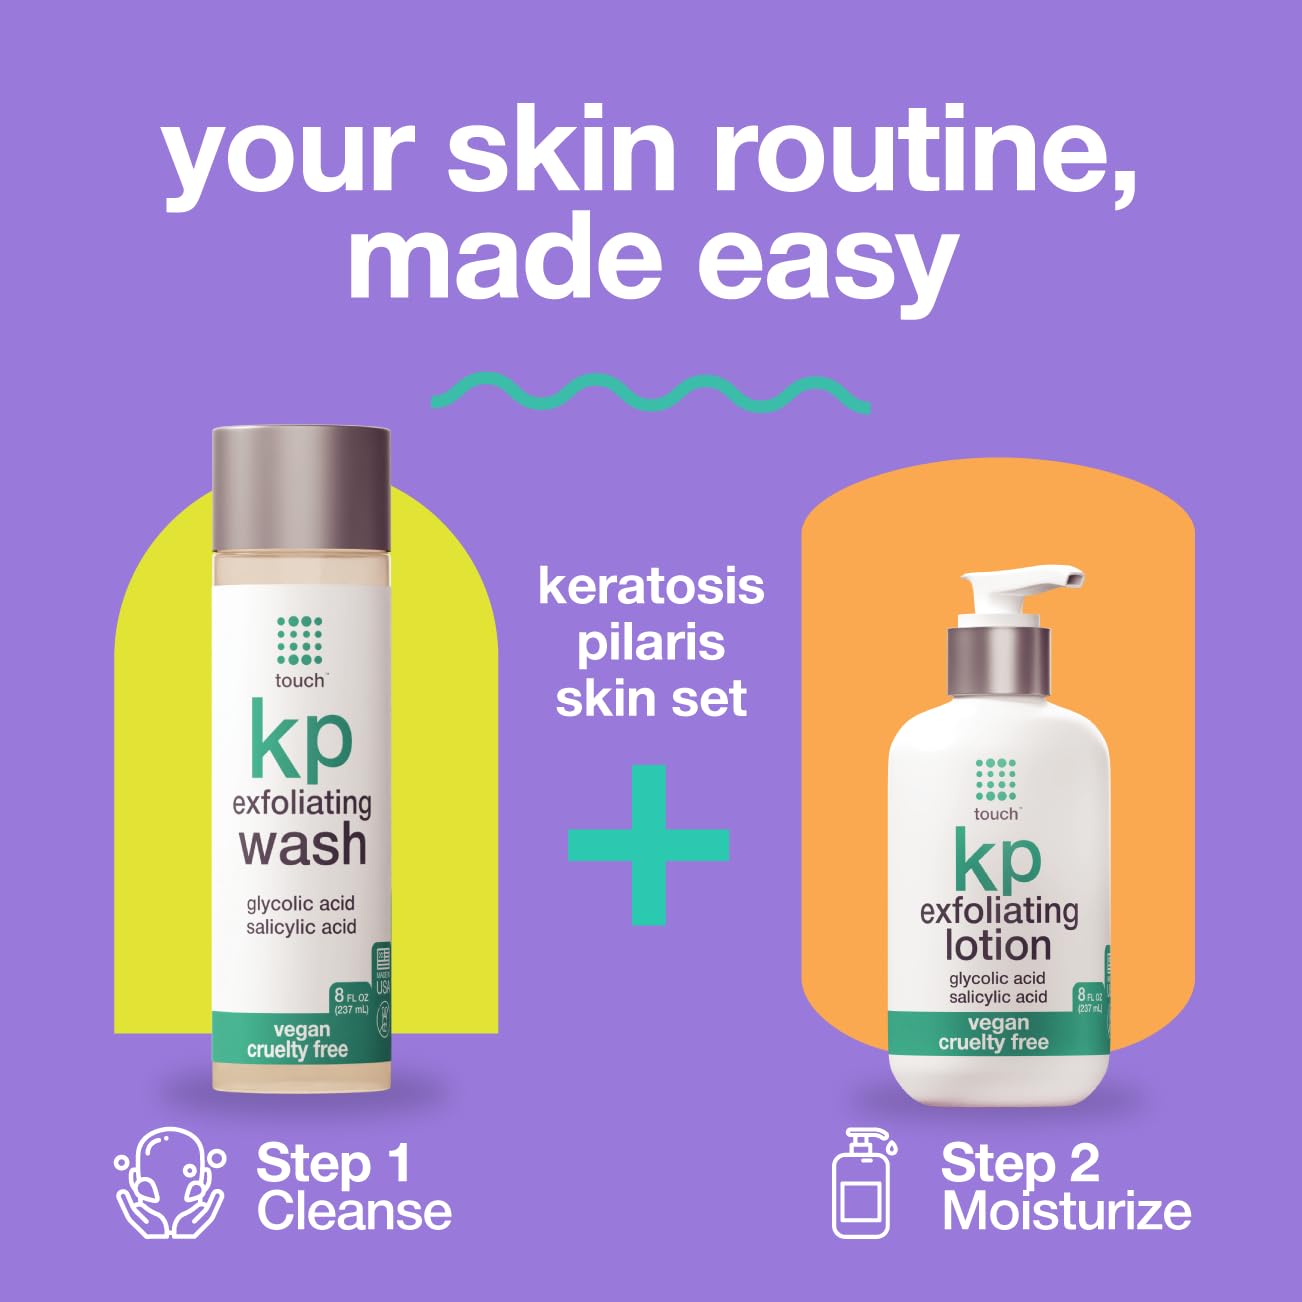 TOUCH Glycolic Acid Lotion for Keratosis Pilaris - KP Lotion Moisturizer - Glycolic Acid Body Lotion for AHA BHA Rough & Bumpy Skin- Keratosis Pilaris Exfoliating Lotion Gets Rid Of Redness - 8 Fl Oz : Beauty & Personal Care